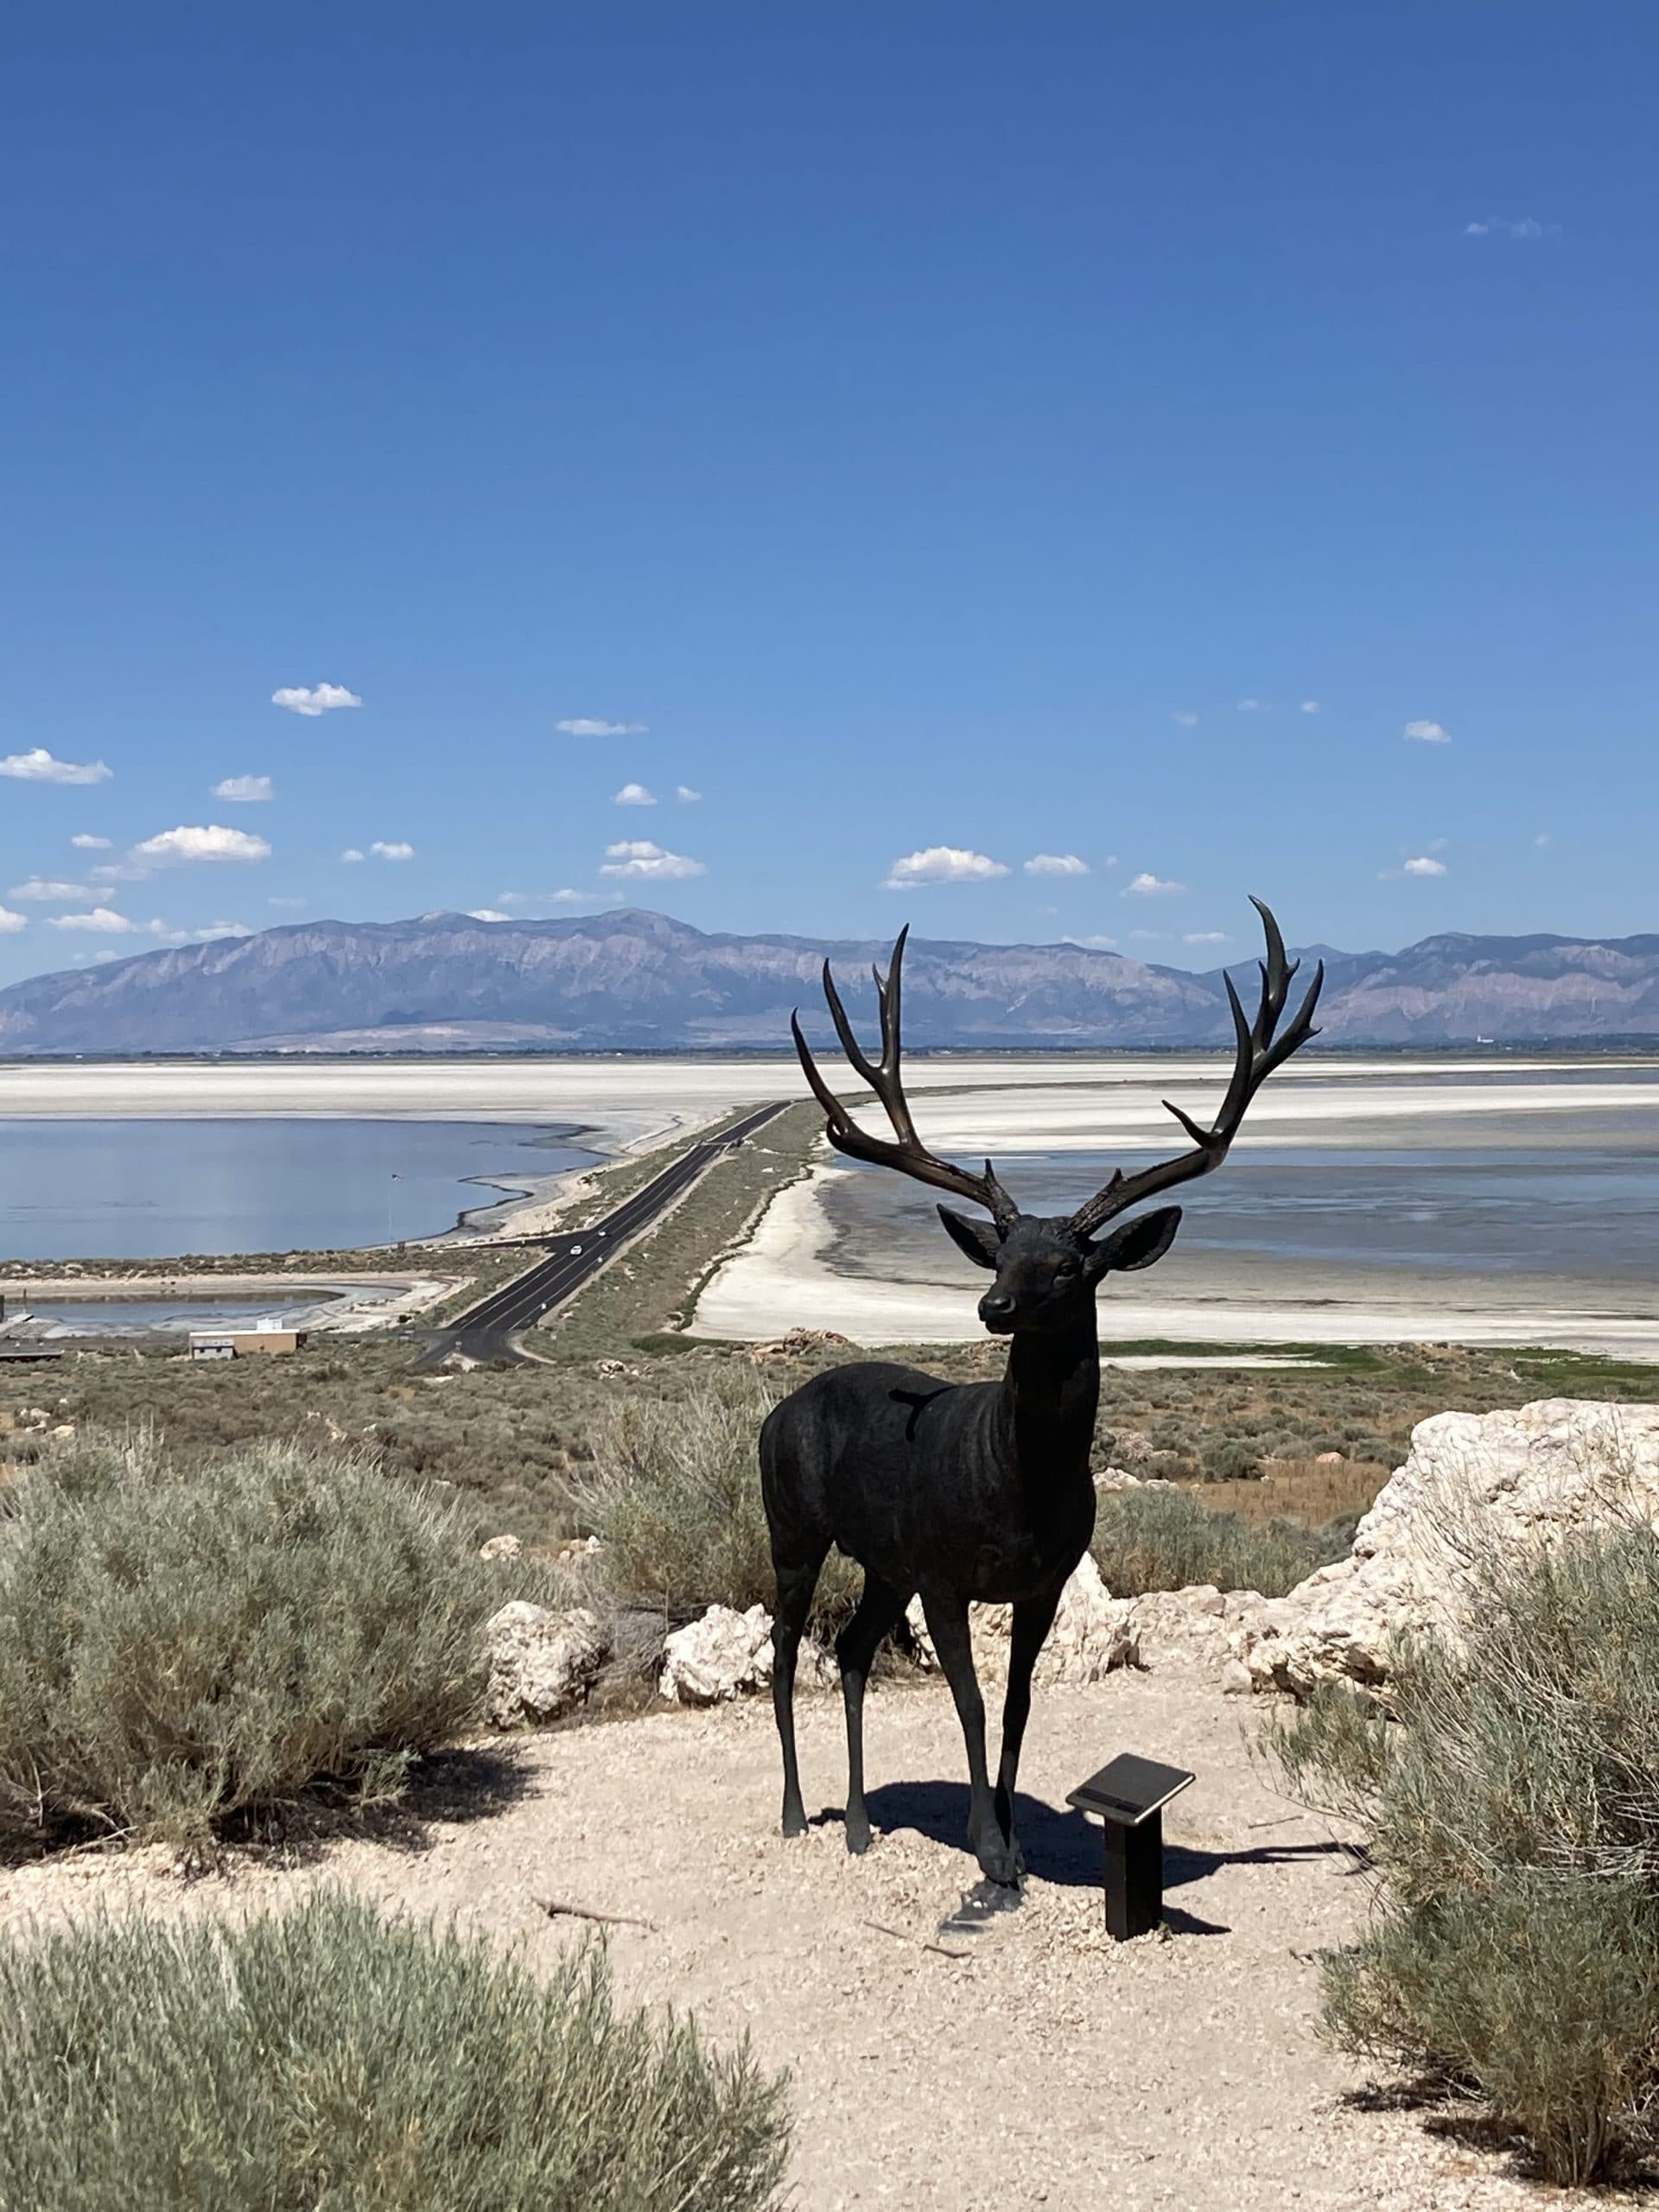 You can drive over a causeway to get to Antelope Island. It's a great day trip from Salt Lake City and a perfect way to spend the day with nature.